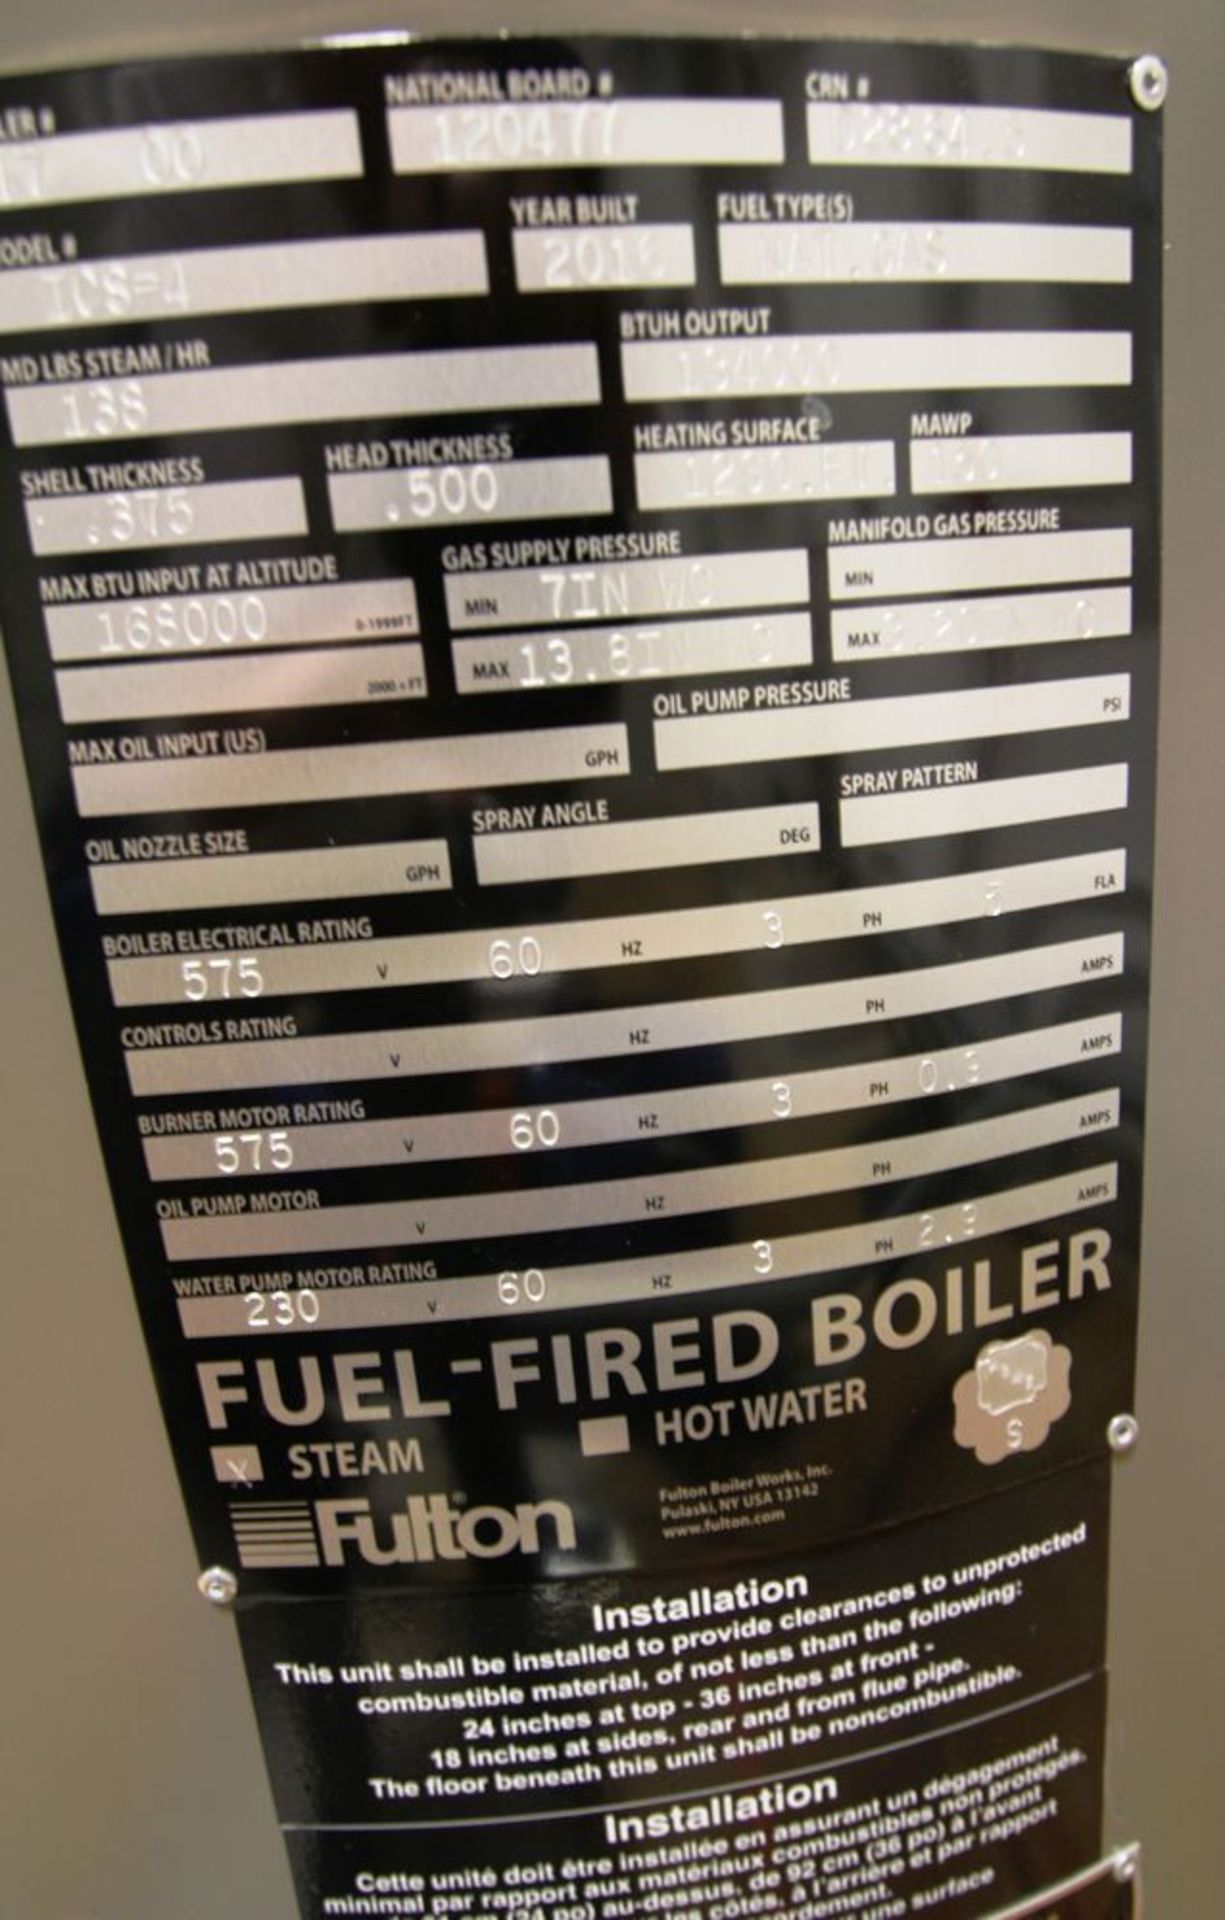 2016 FULTON MODEL TCS-4 STEAM FUEL-FIRED BOILER MOUNTED ON STEEL BASE, 134,000 BTU, 12 SQ FT HEATING - Image 11 of 25